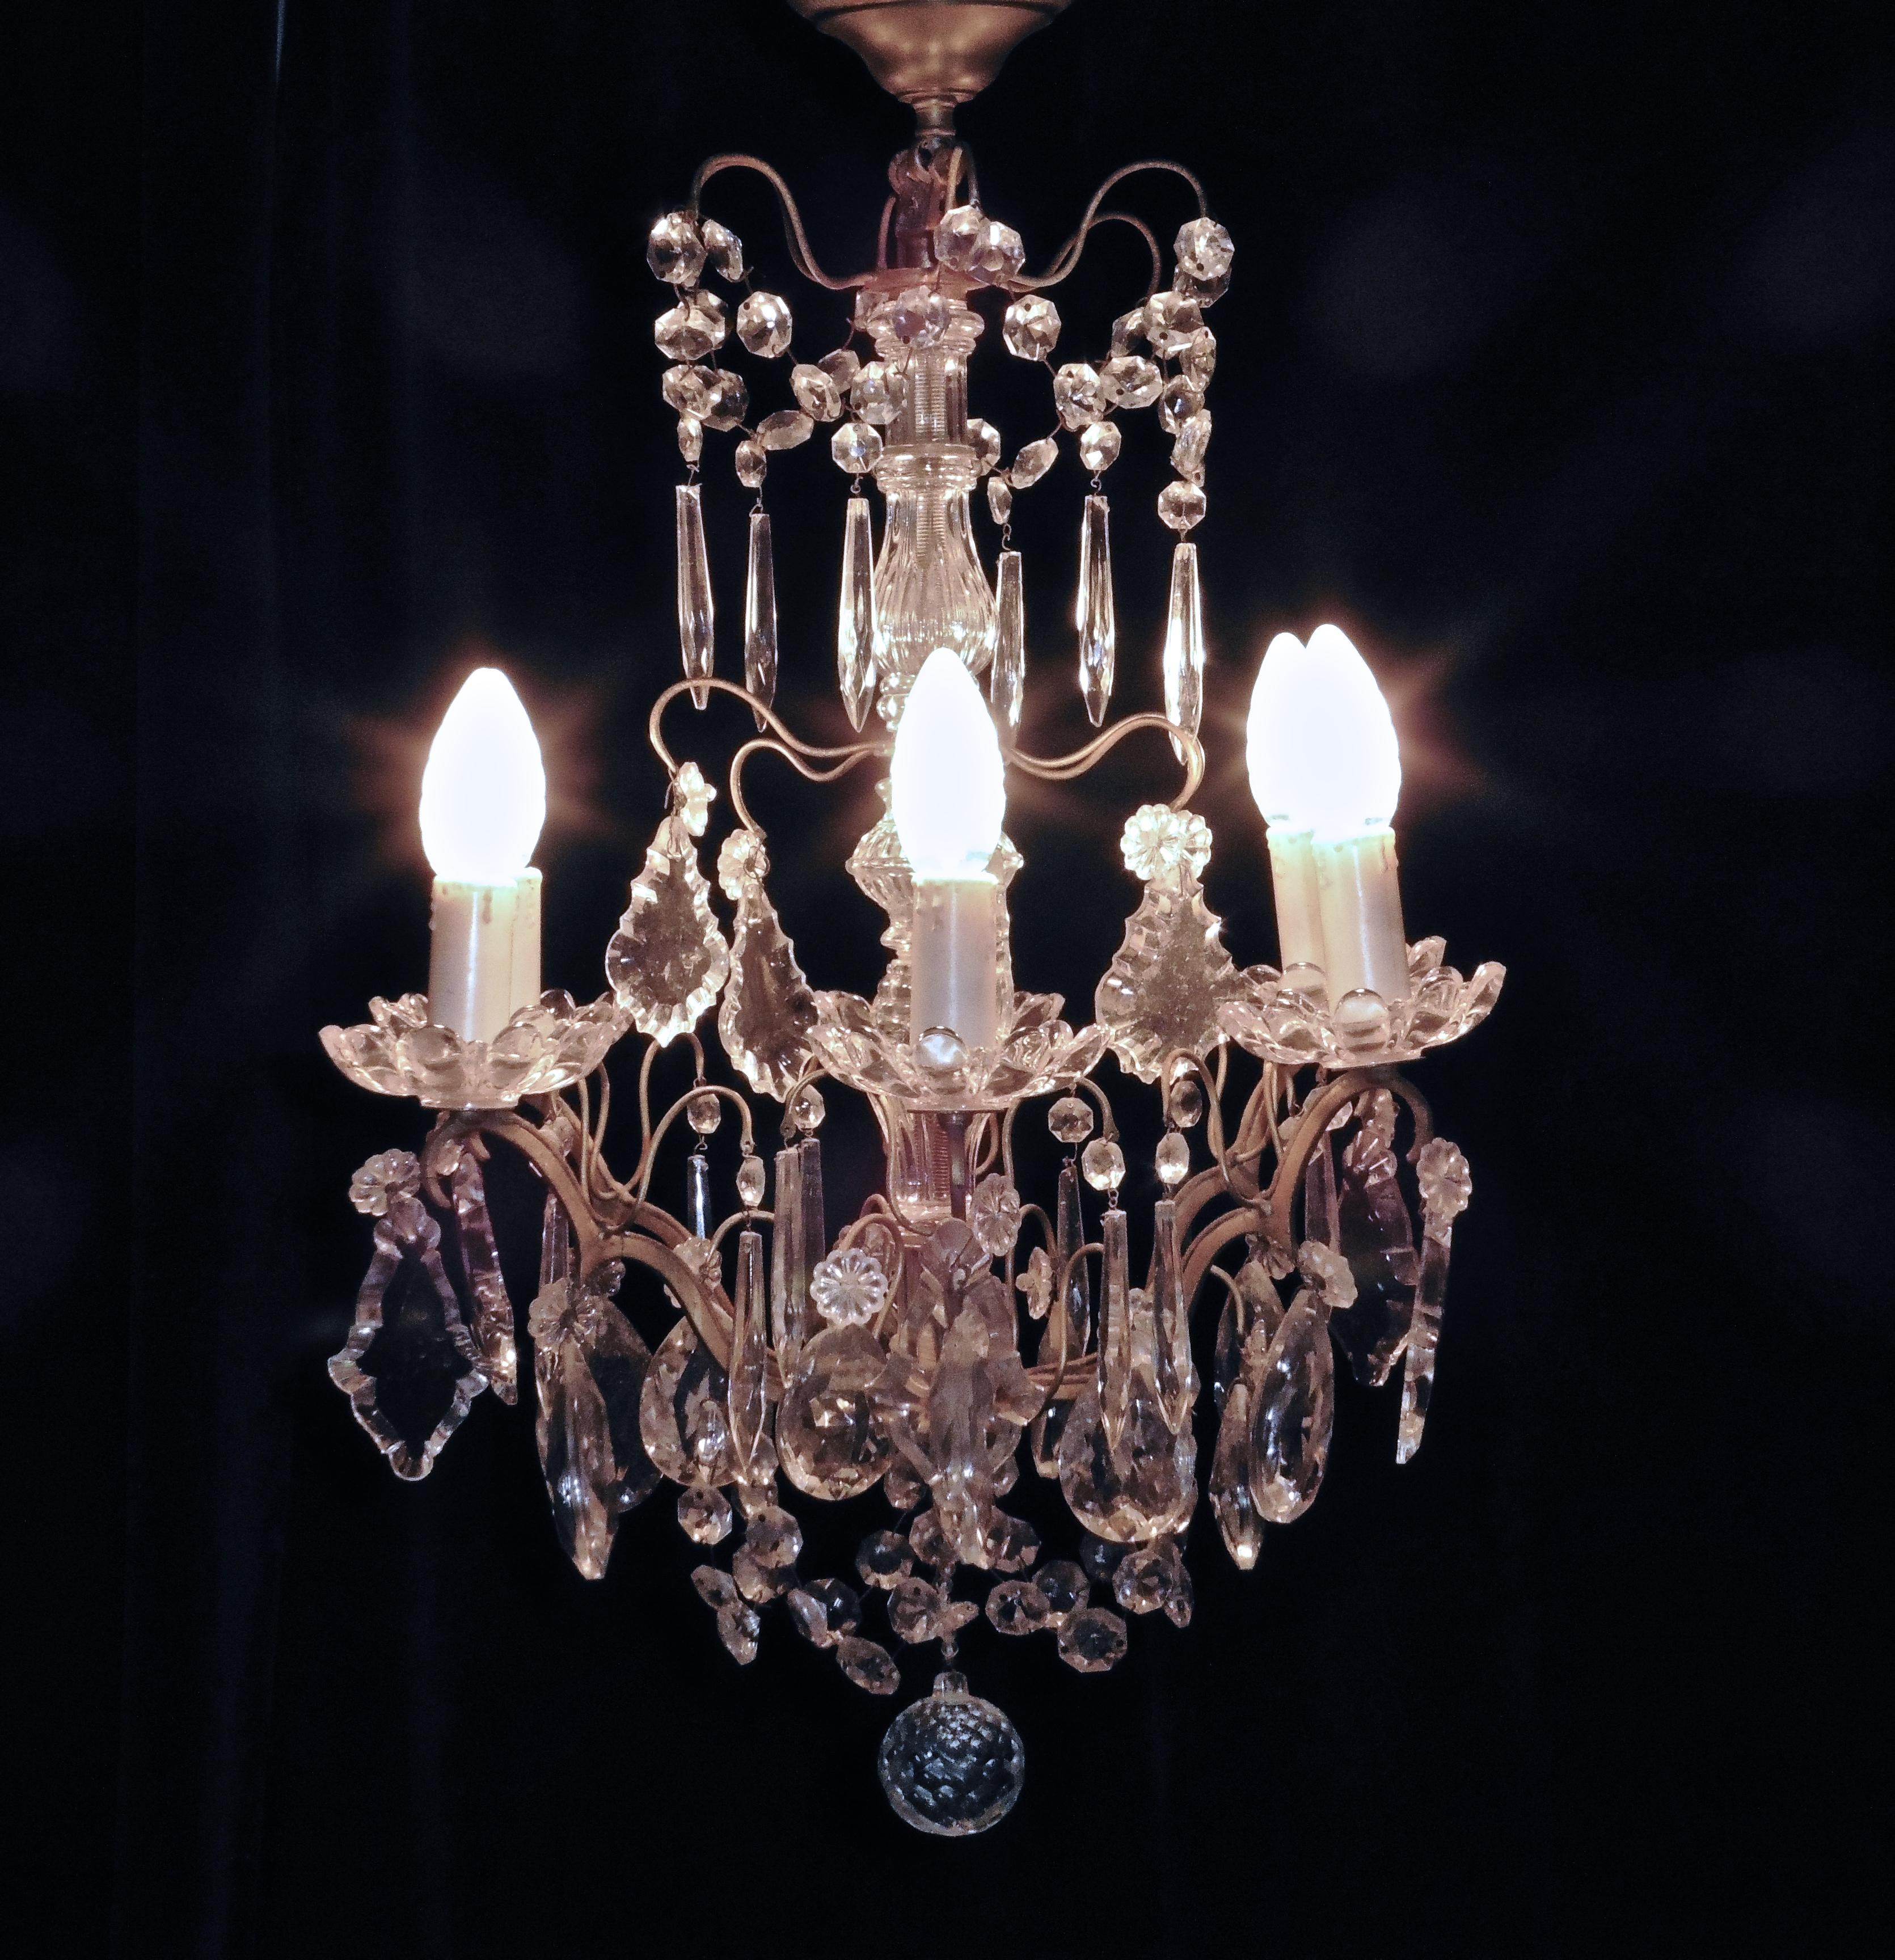 A charming French cut glass 6 branch brass chandelier.

This is a superb brass chandelier, the brass has a gilded finish and the 6 arms have pressed glass sconces which are hung with glass chains, drops and pendants, in a variety of pretty shapes